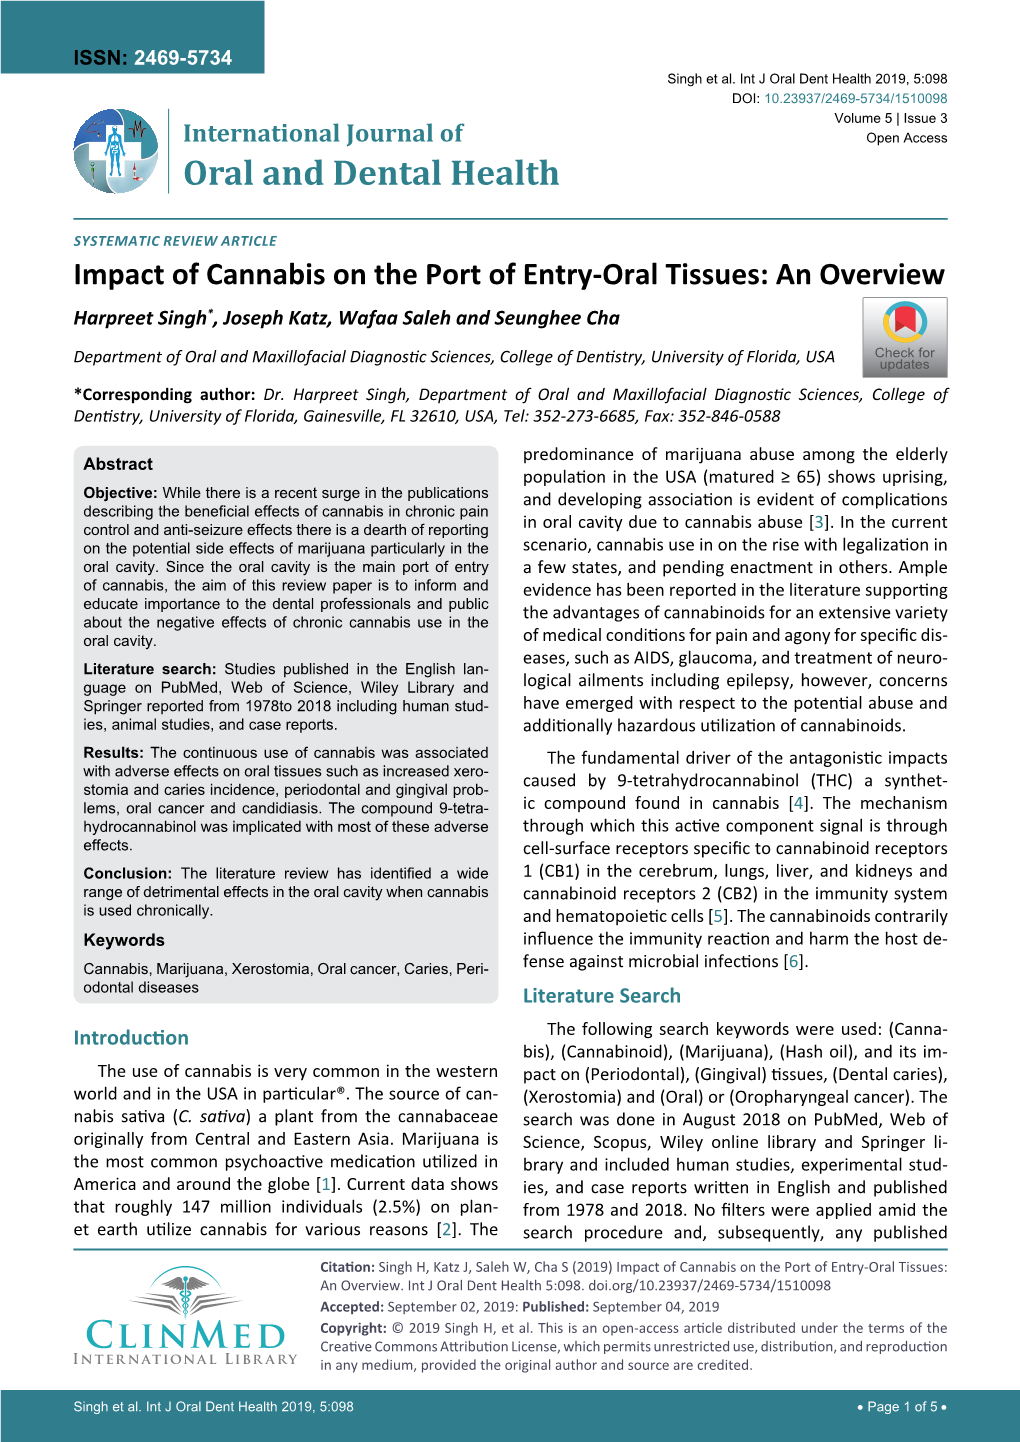 Impact of Cannabis on the Port of Entry-Oral Tissues: an Overview Harpreet Singh*, Joseph Katz, Wafaa Saleh and Seunghee Cha